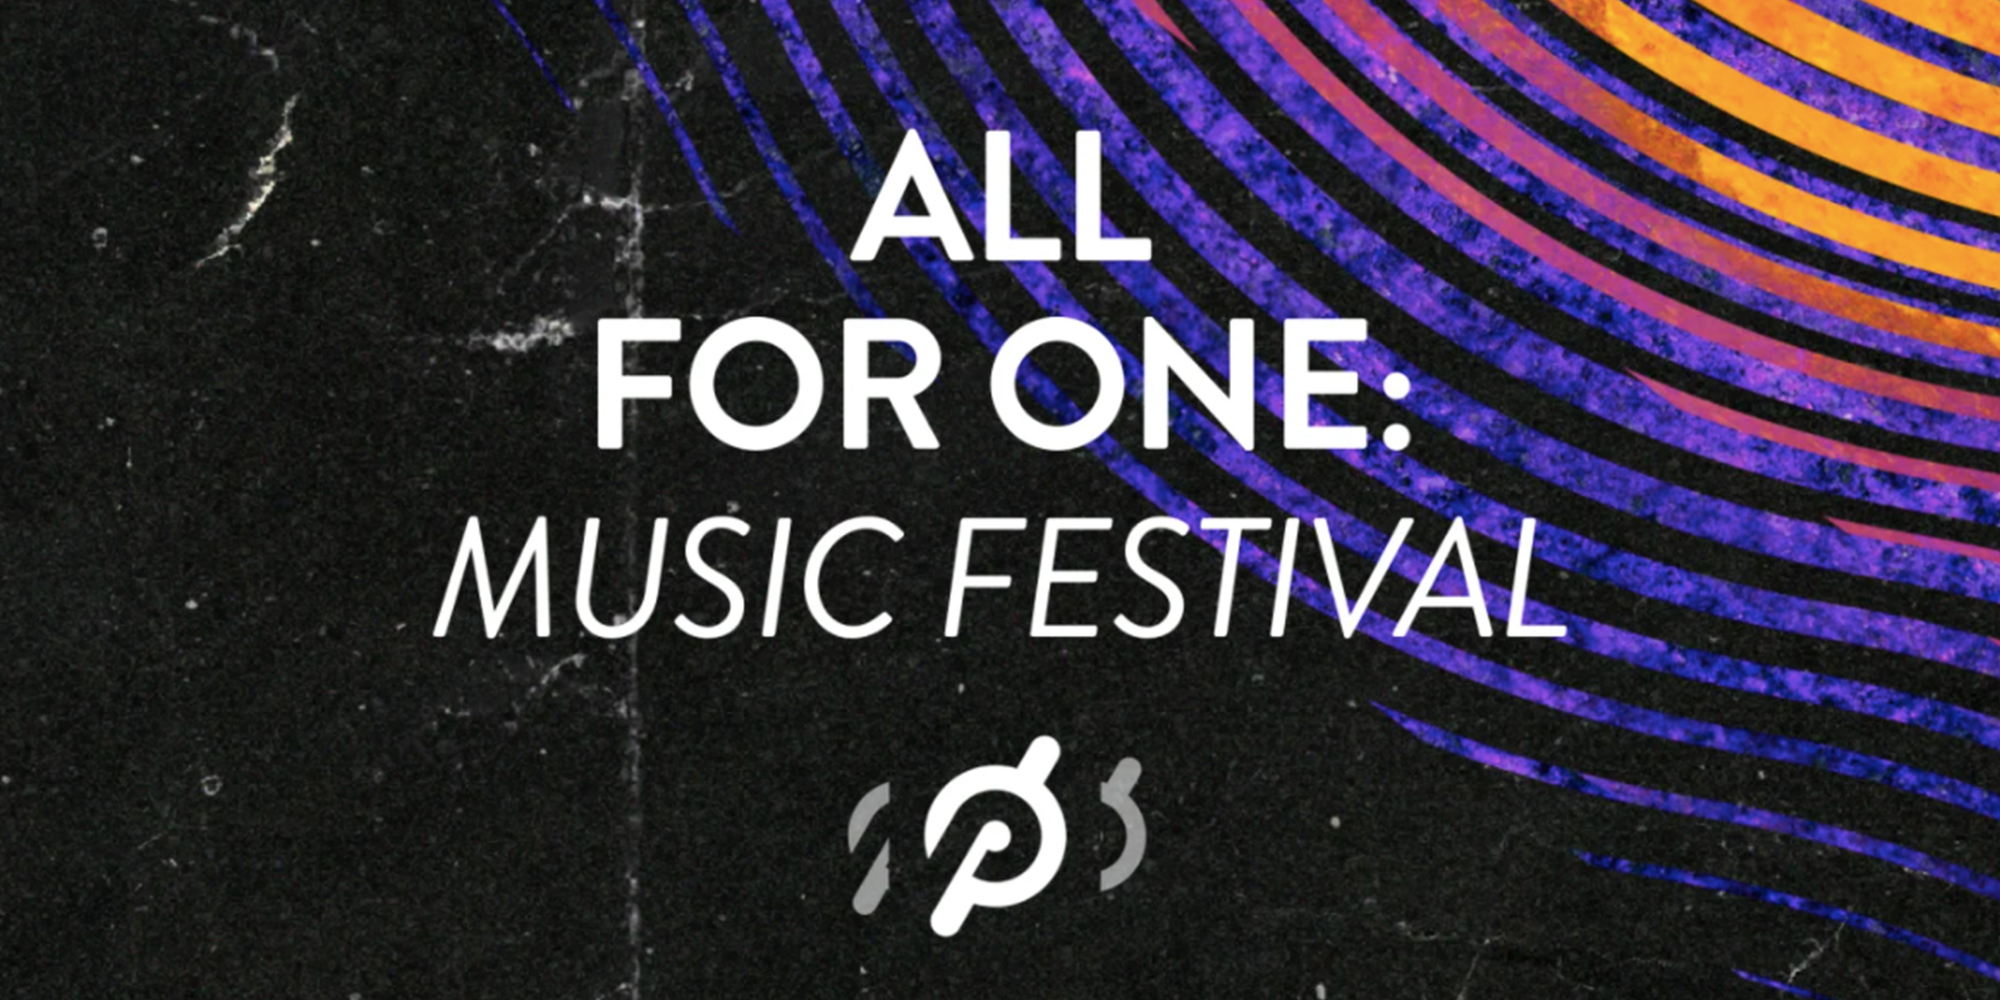 Peloton reveals 2021 All For One Music Festival lineup featuring unique